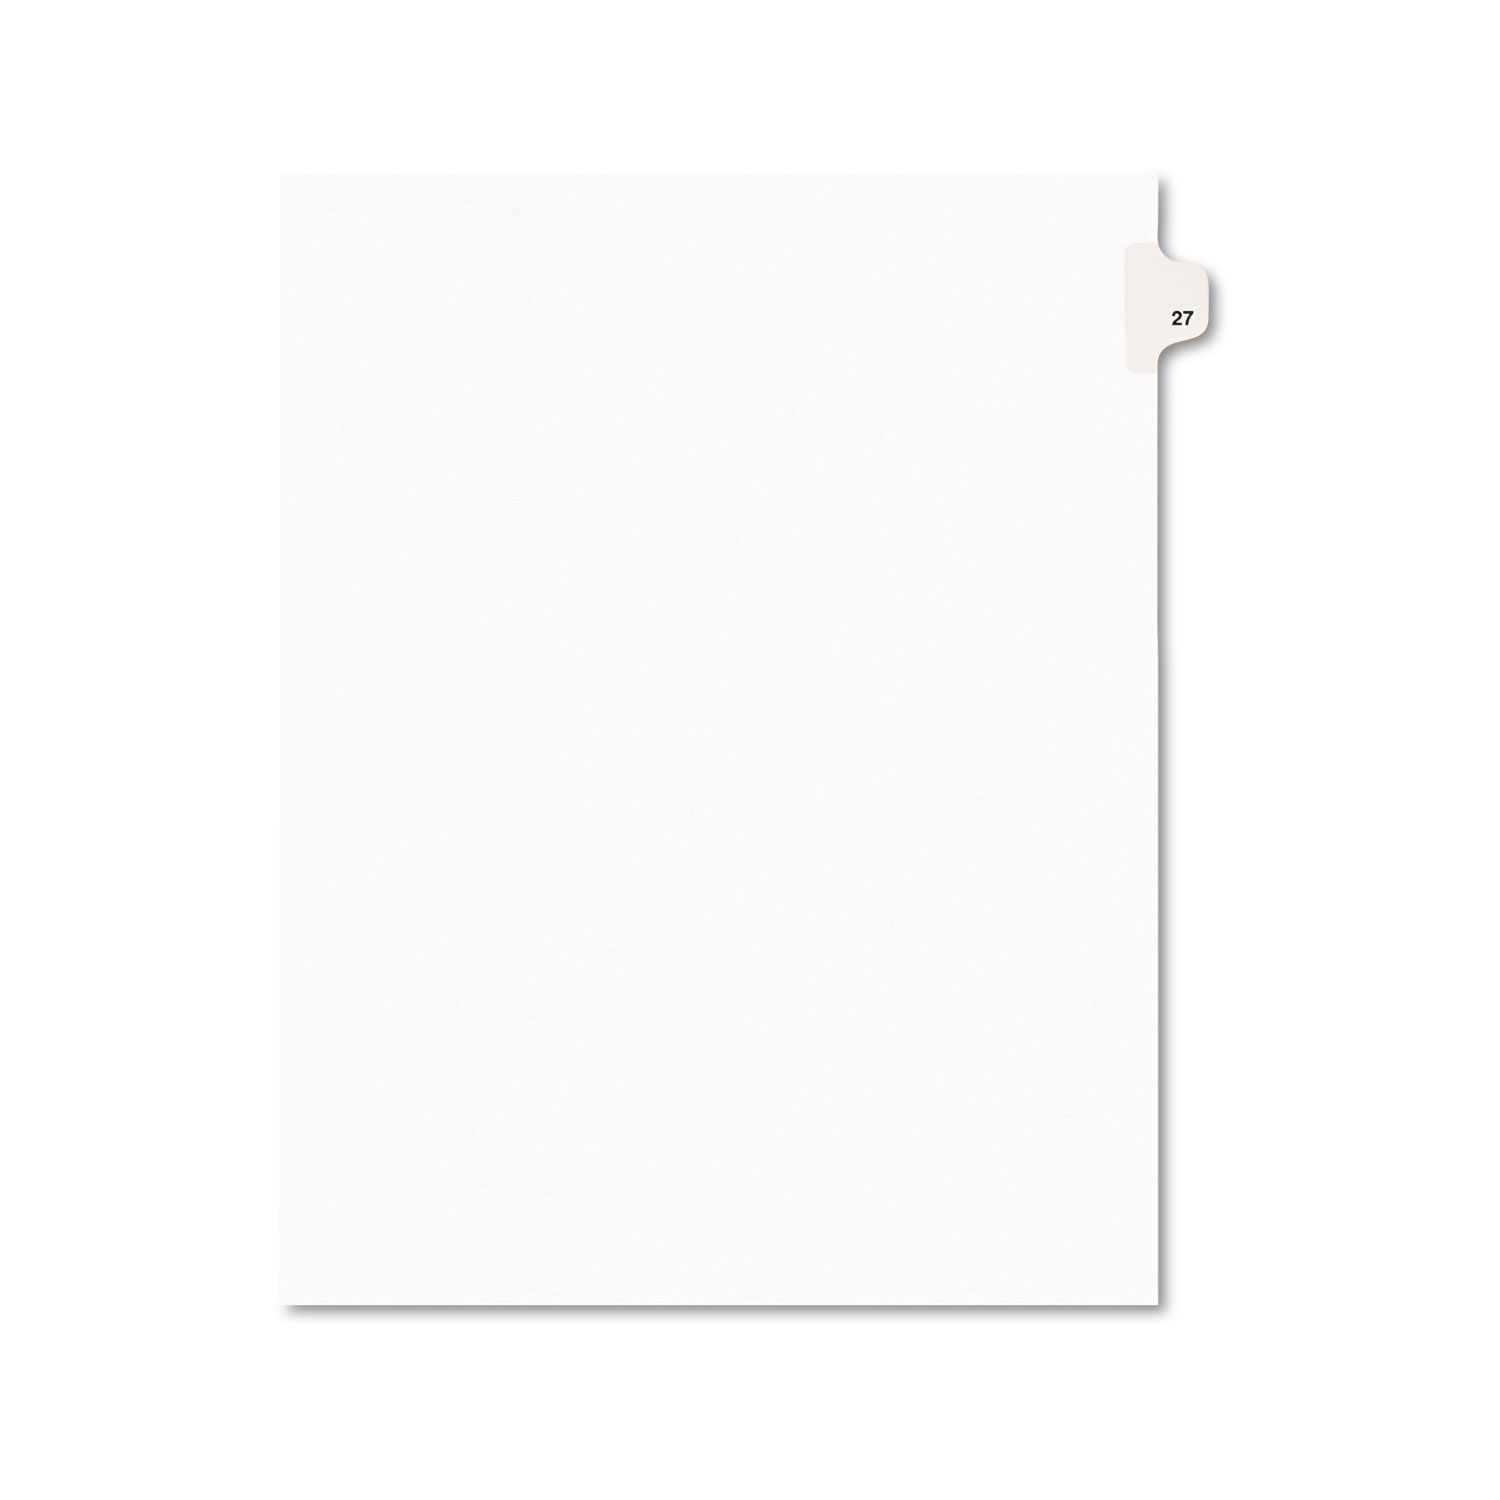  Avery 01027 Preprinted Legal Exhibit Side Tab Index Dividers, Avery Style, 10-Tab, 27, 11 x 8.5, White, 25/Pack (AVE01027) 